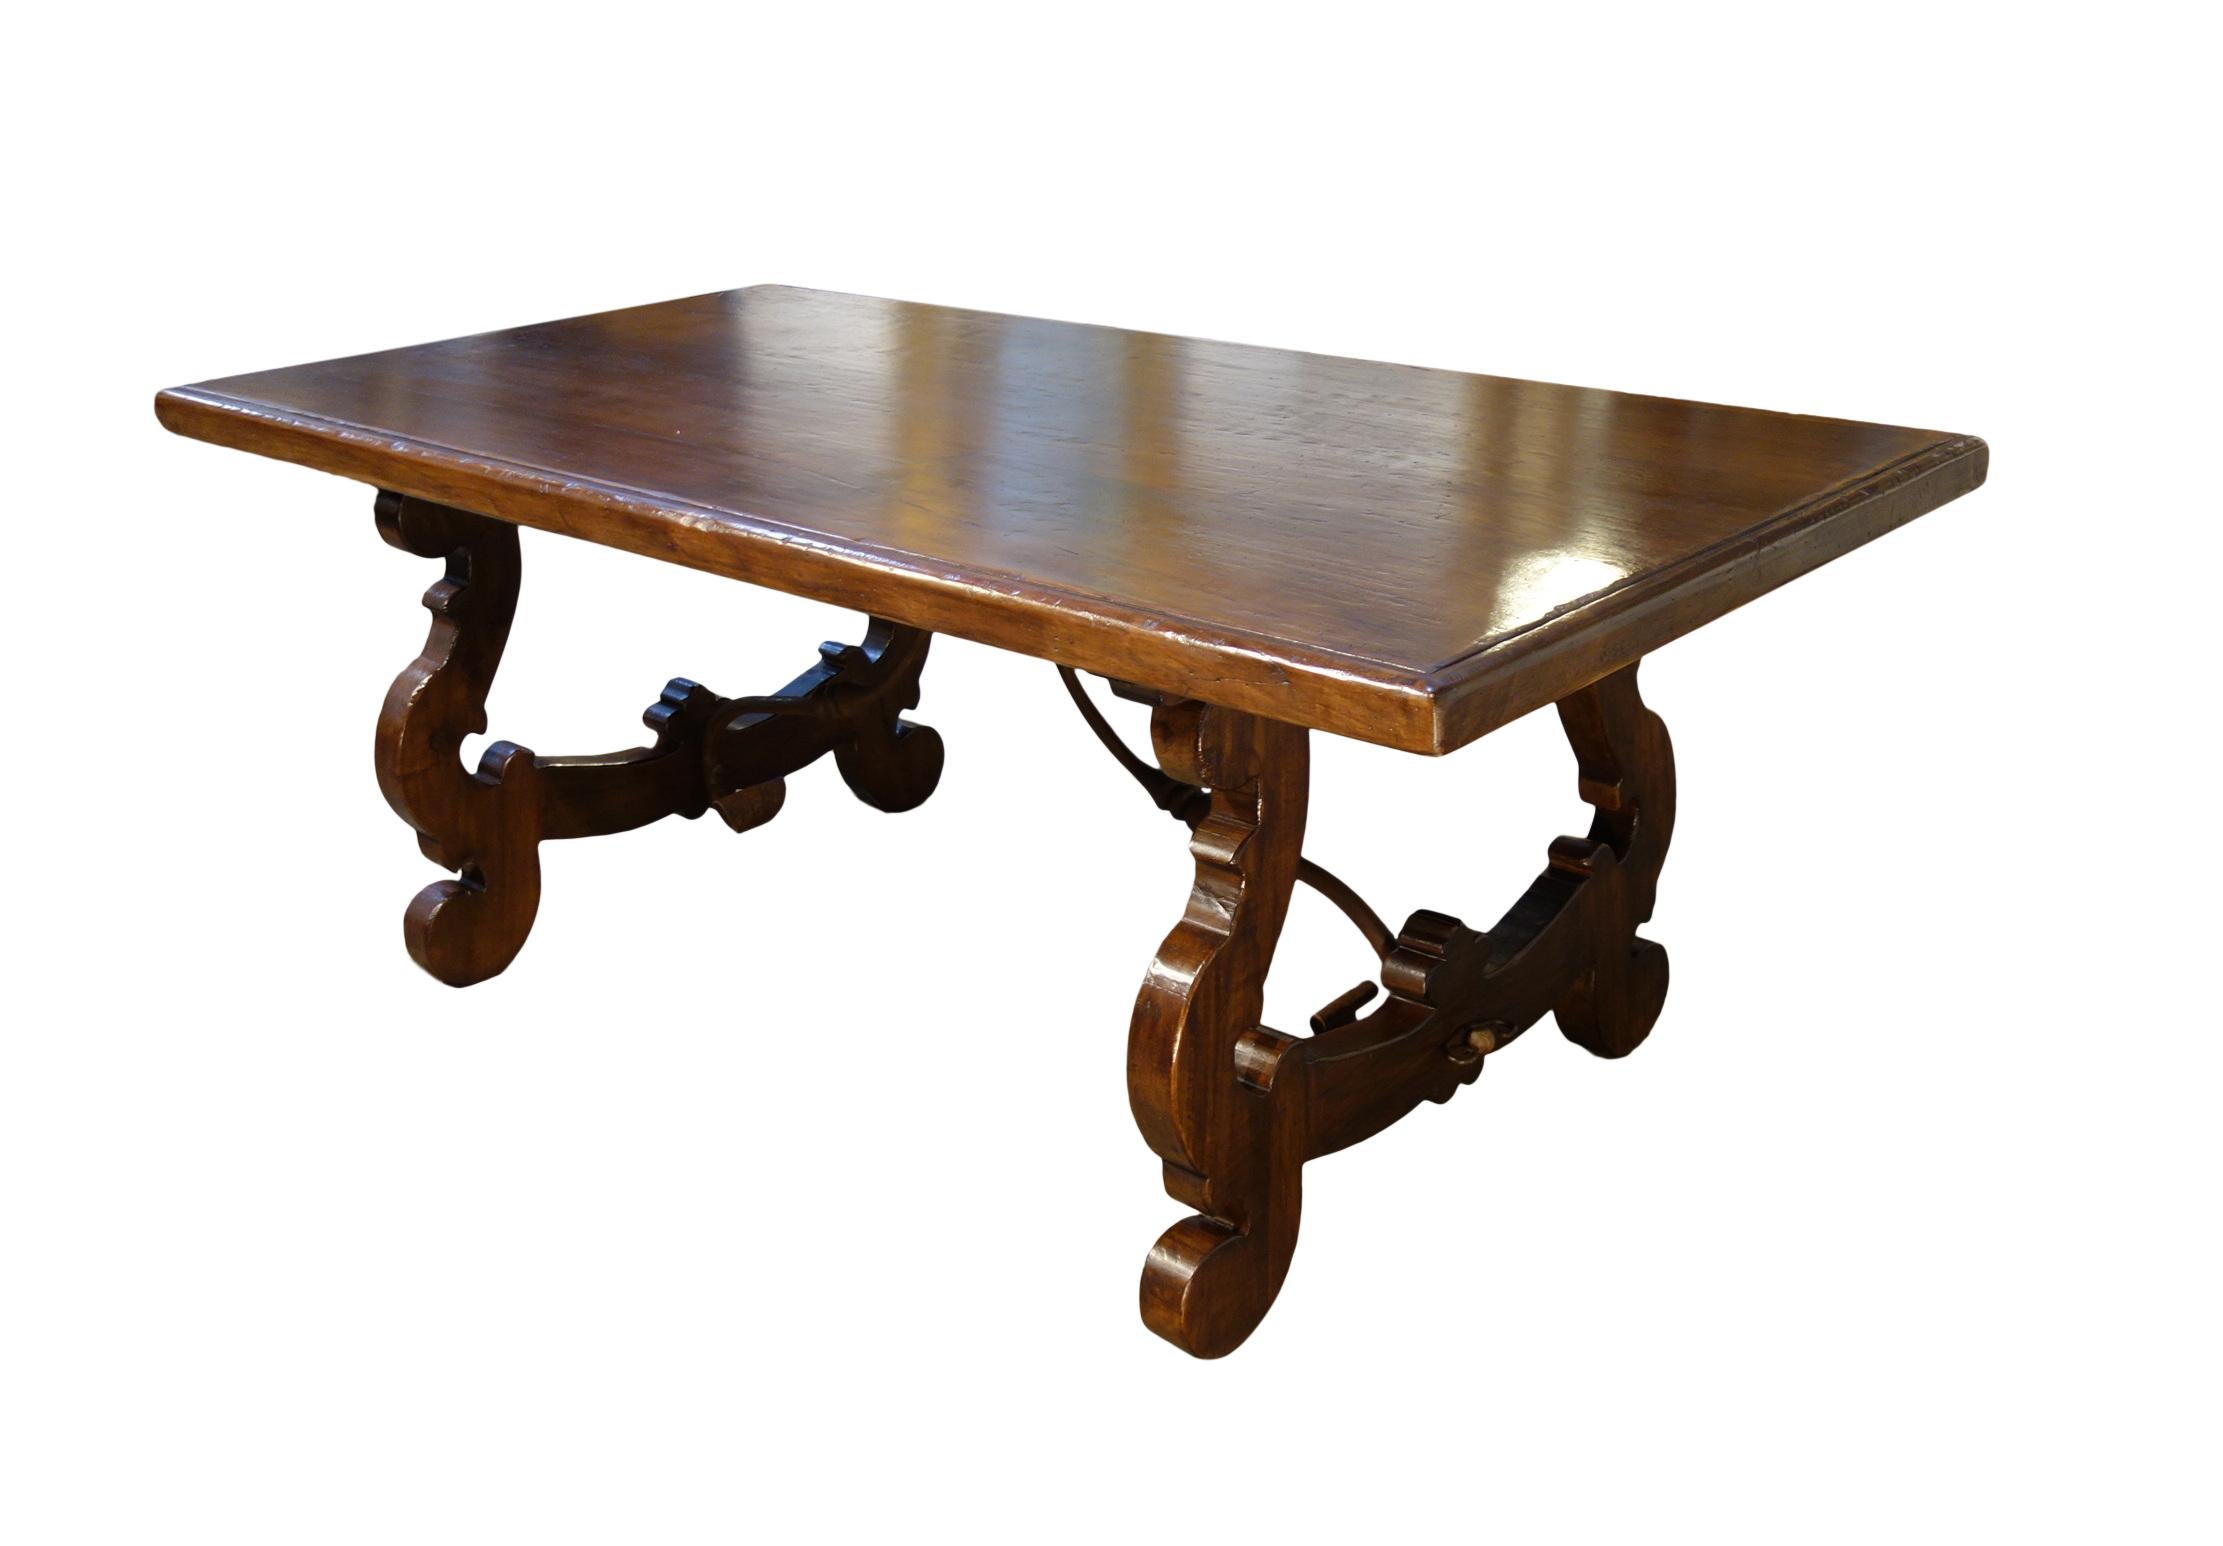 Our classic Lira style dining table: Old Walnut refectory table with sculpted edges, lyre-shaped bases, and hand-forged iron elements and Crafted in aged Italian premium solid walnut, featured in Espresso Dark shellac finish by our Master Craftsmen